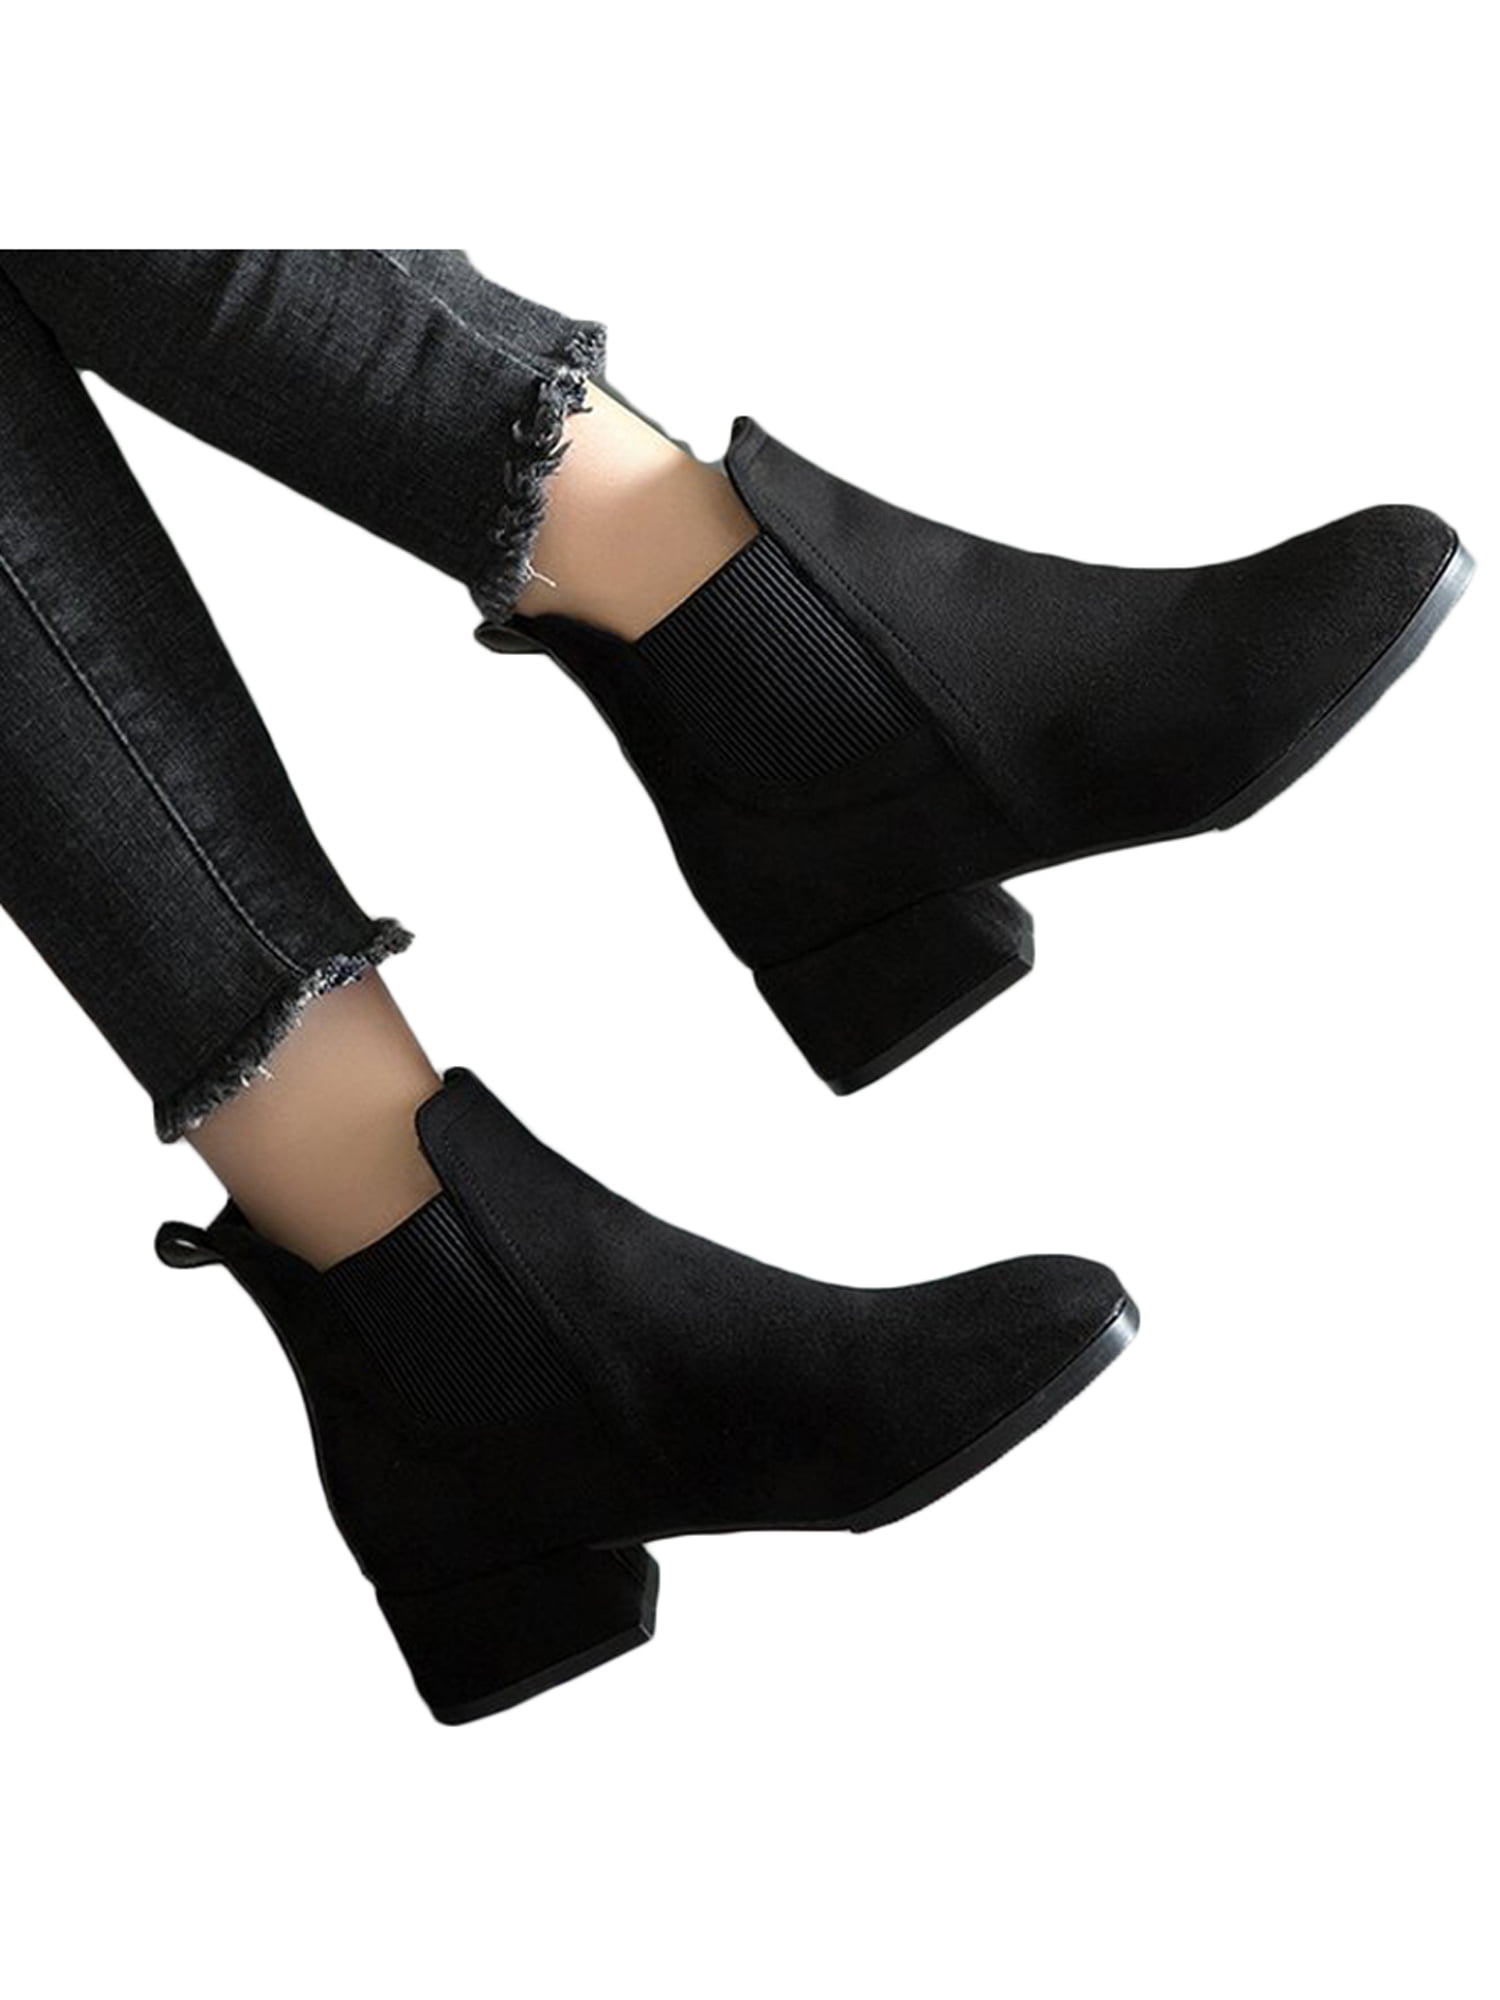 Retro Womens Biker Chelsea Ankle Boots Low Chunky Heel Military Shoes Casual Hot 